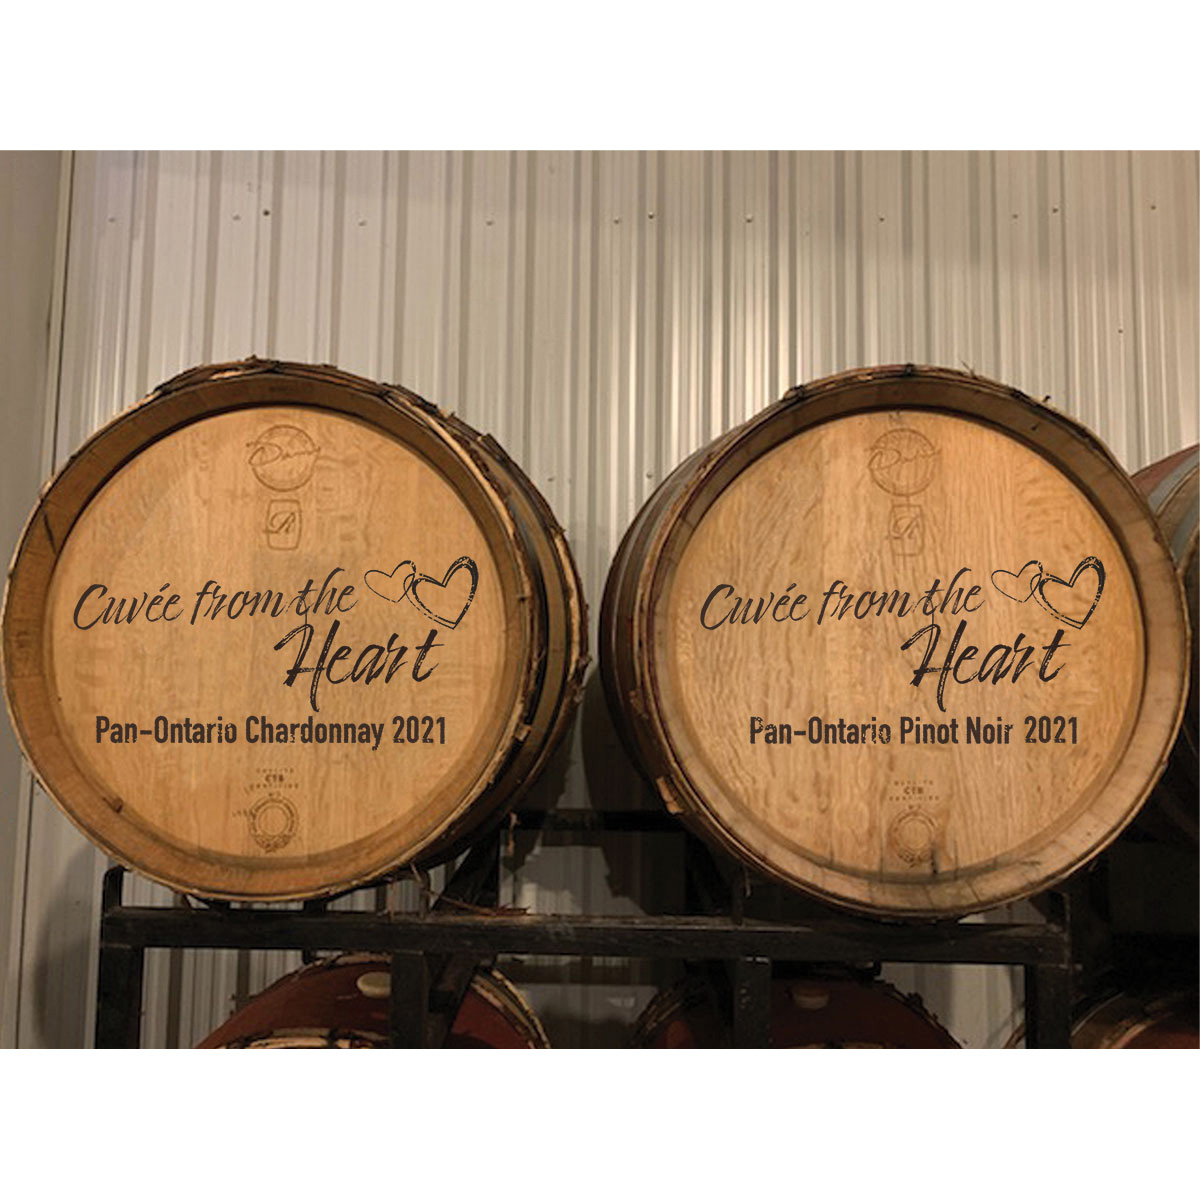 FROM THE HEART CUVÉE # 3 CHARDONNAY 2021 (3 MAG.)
FROM THE HEART CUVÉE # 3 PINOT NOIR 2021 (3 MAG.)